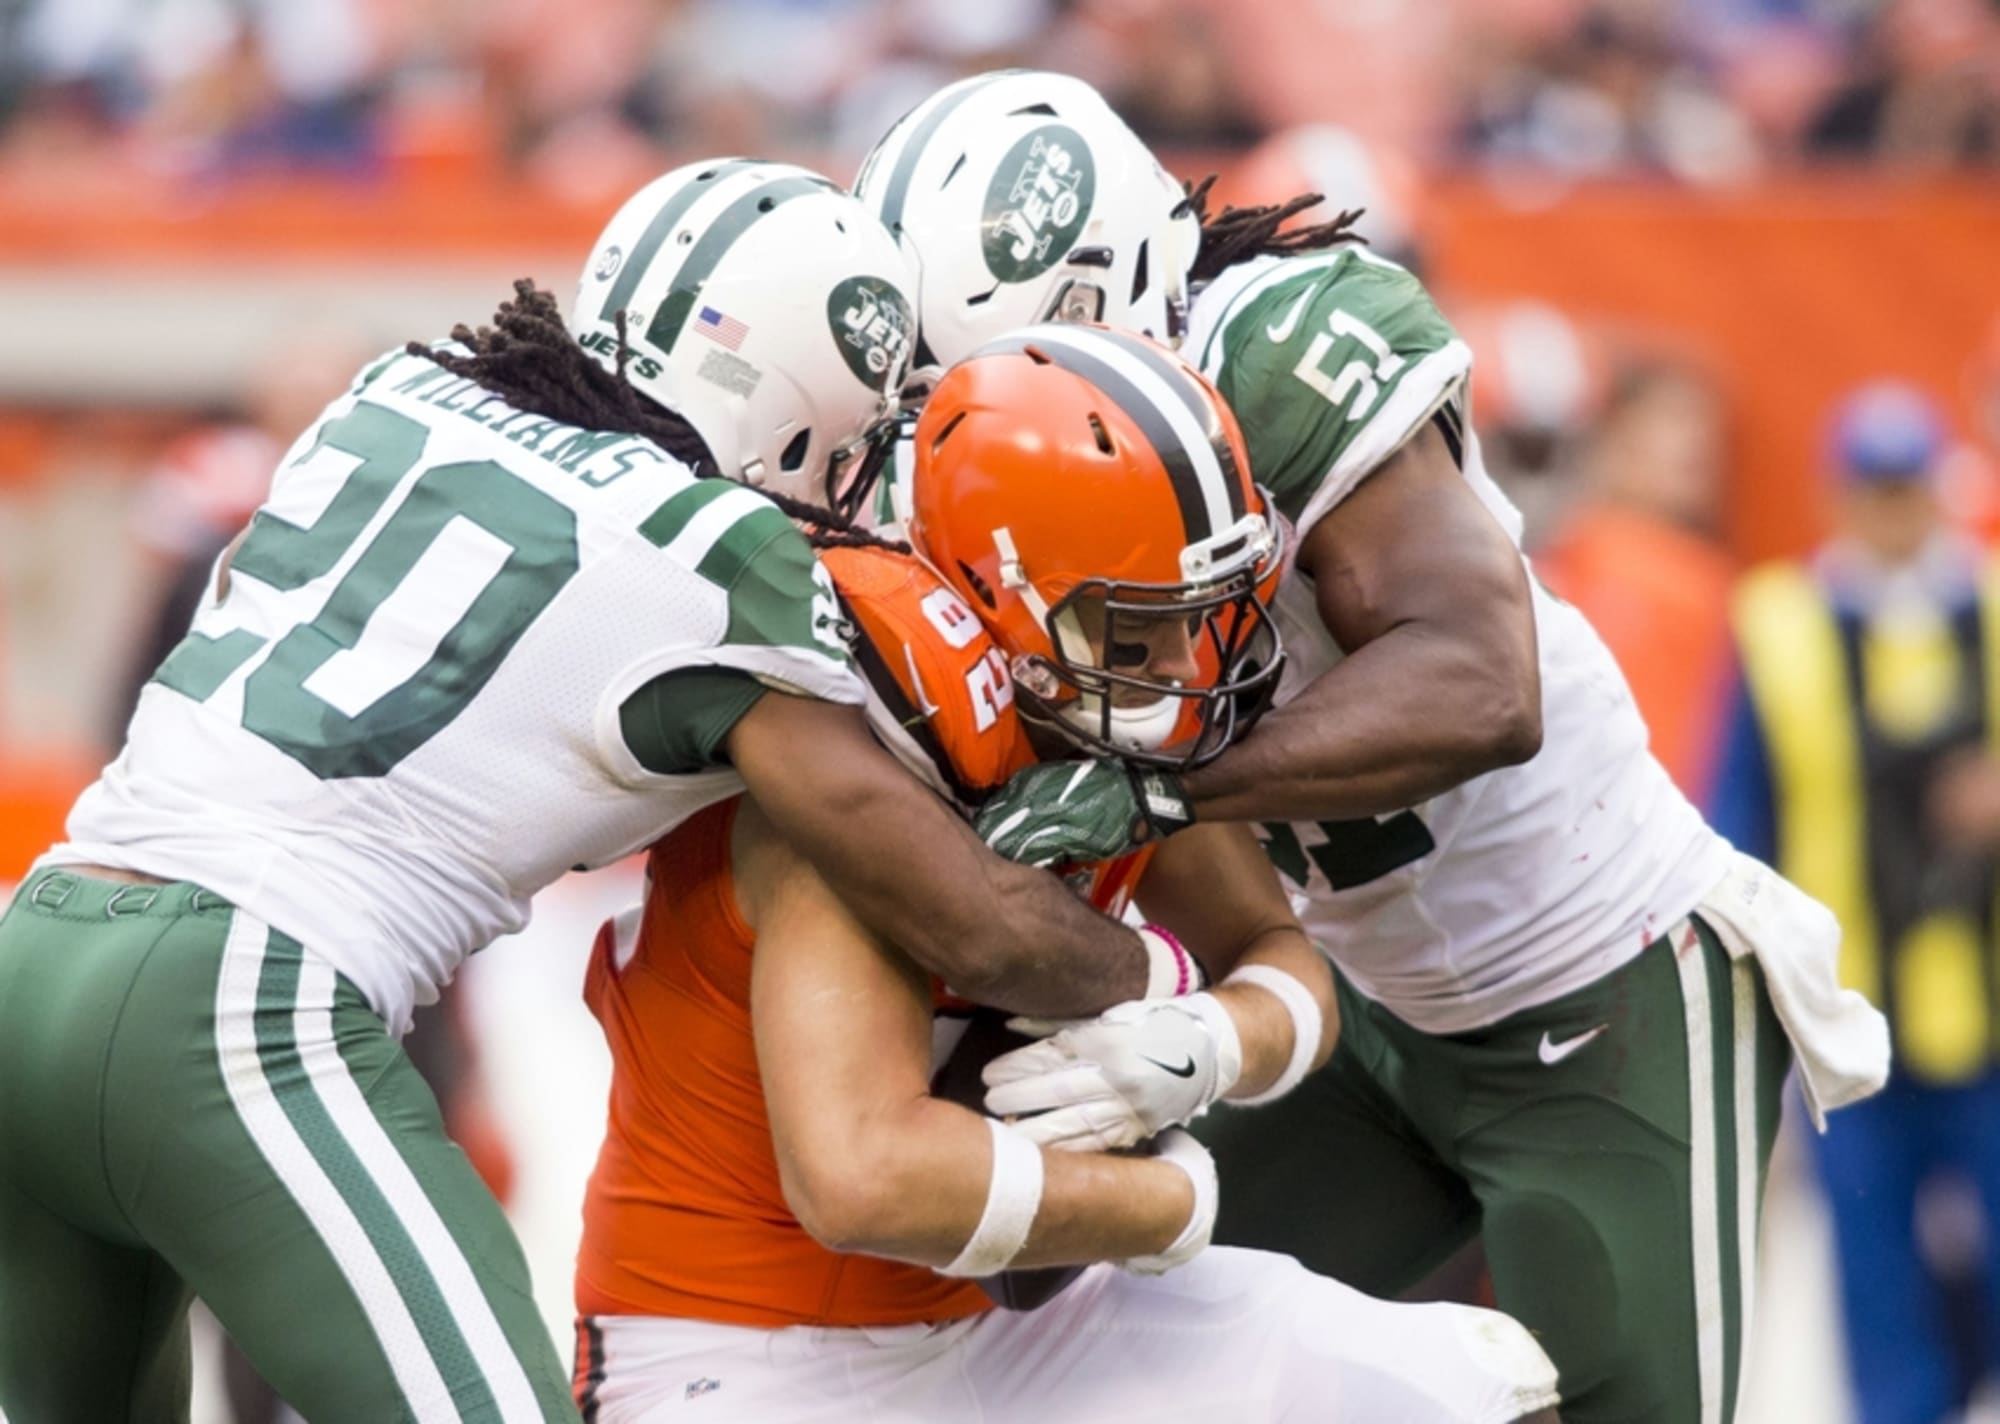 jets vs browns play by play